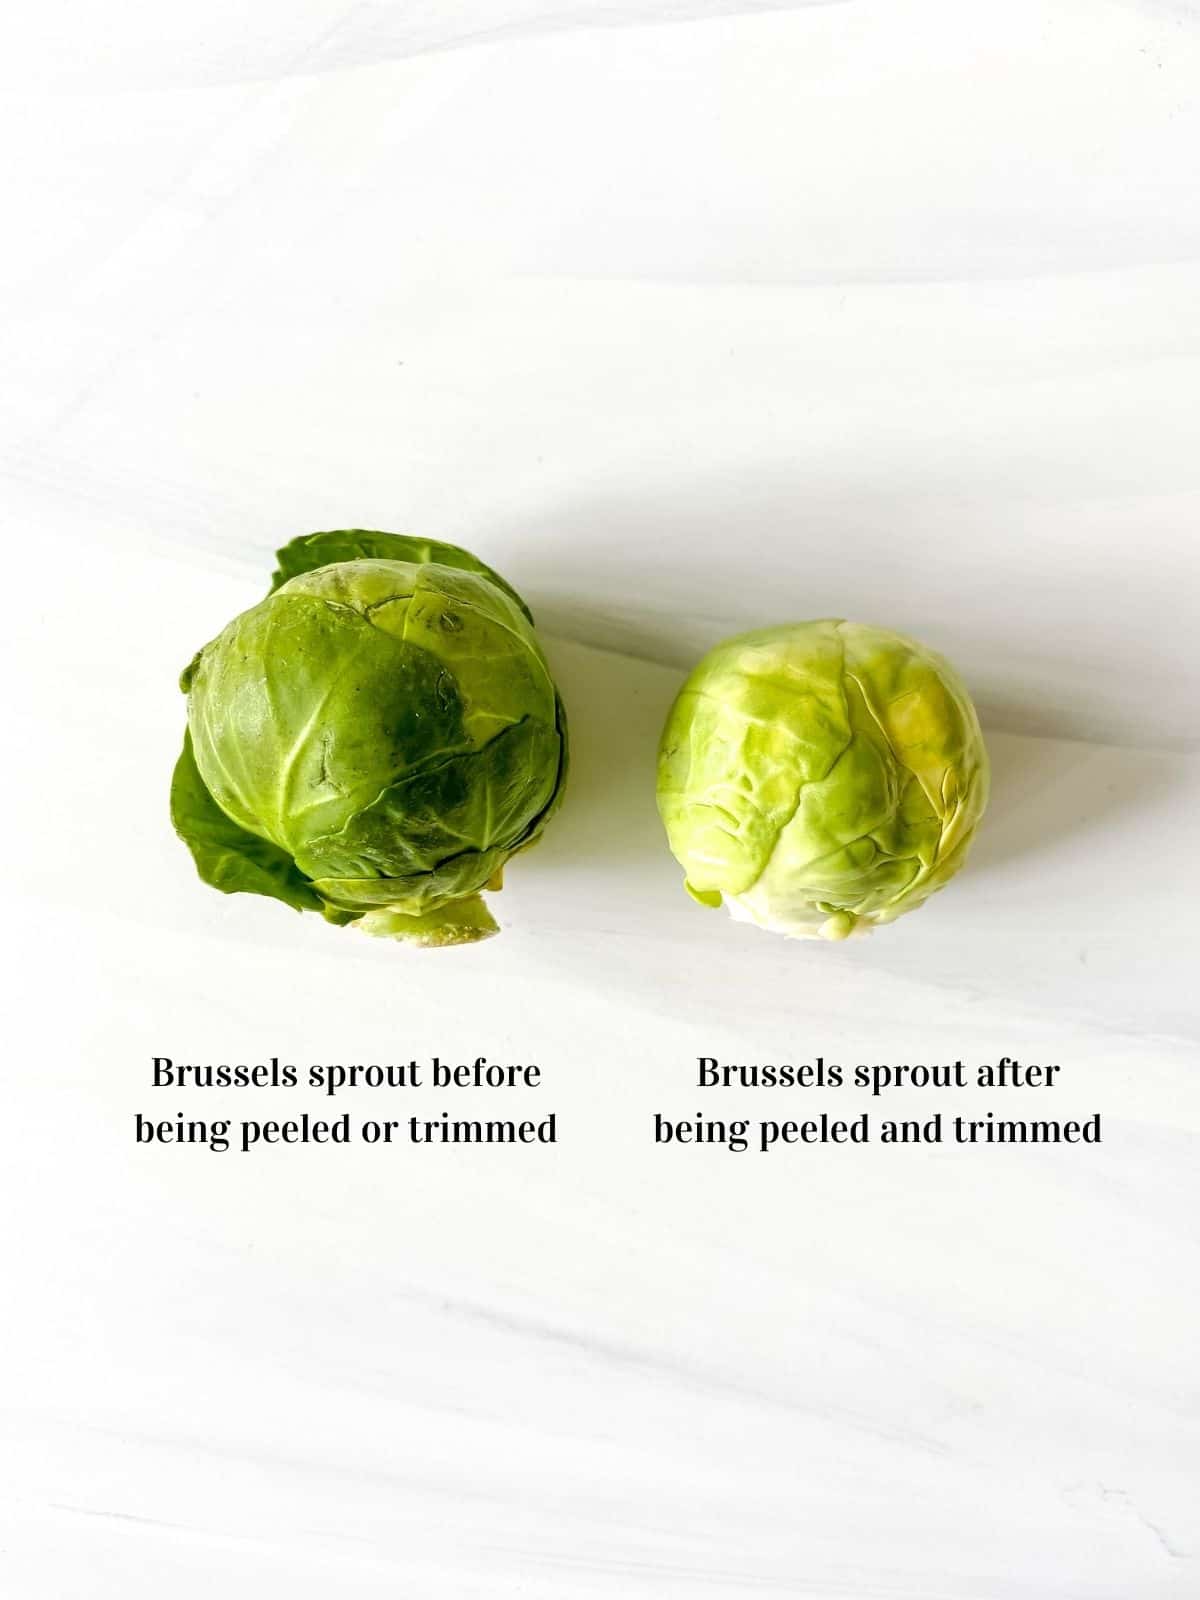 one unpeeled and one peeled brussels sprout.